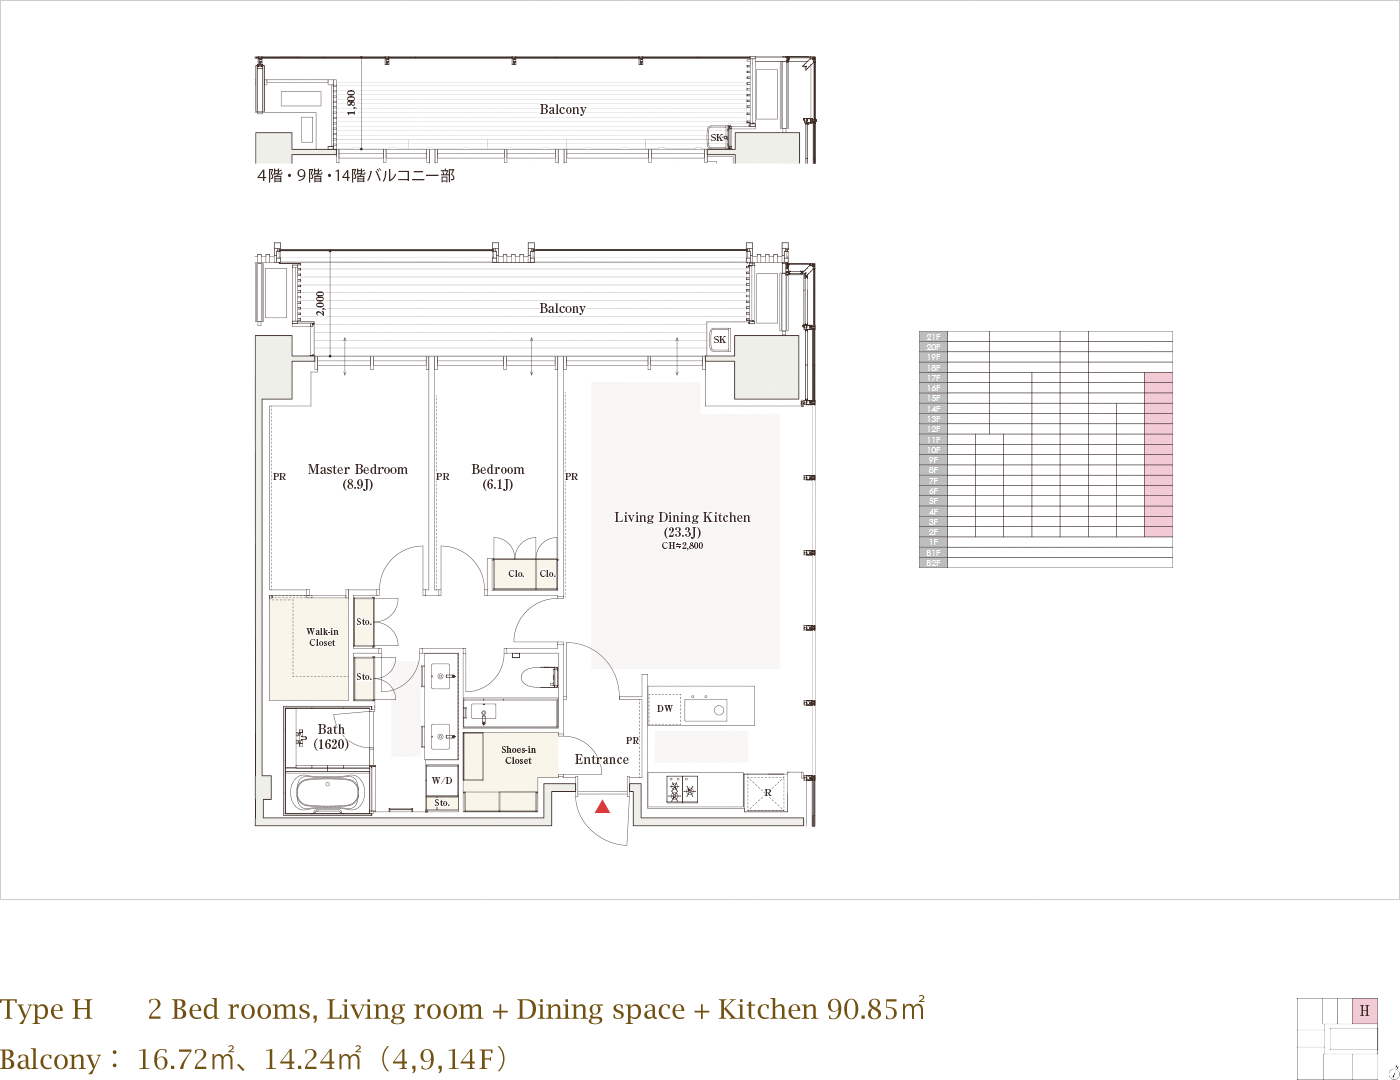 Type H 2 Bed rooms, Living room + Dining space + Kitchen 90.85m² Balcony 16.72m²,14.24m²(4F,9F,14F)